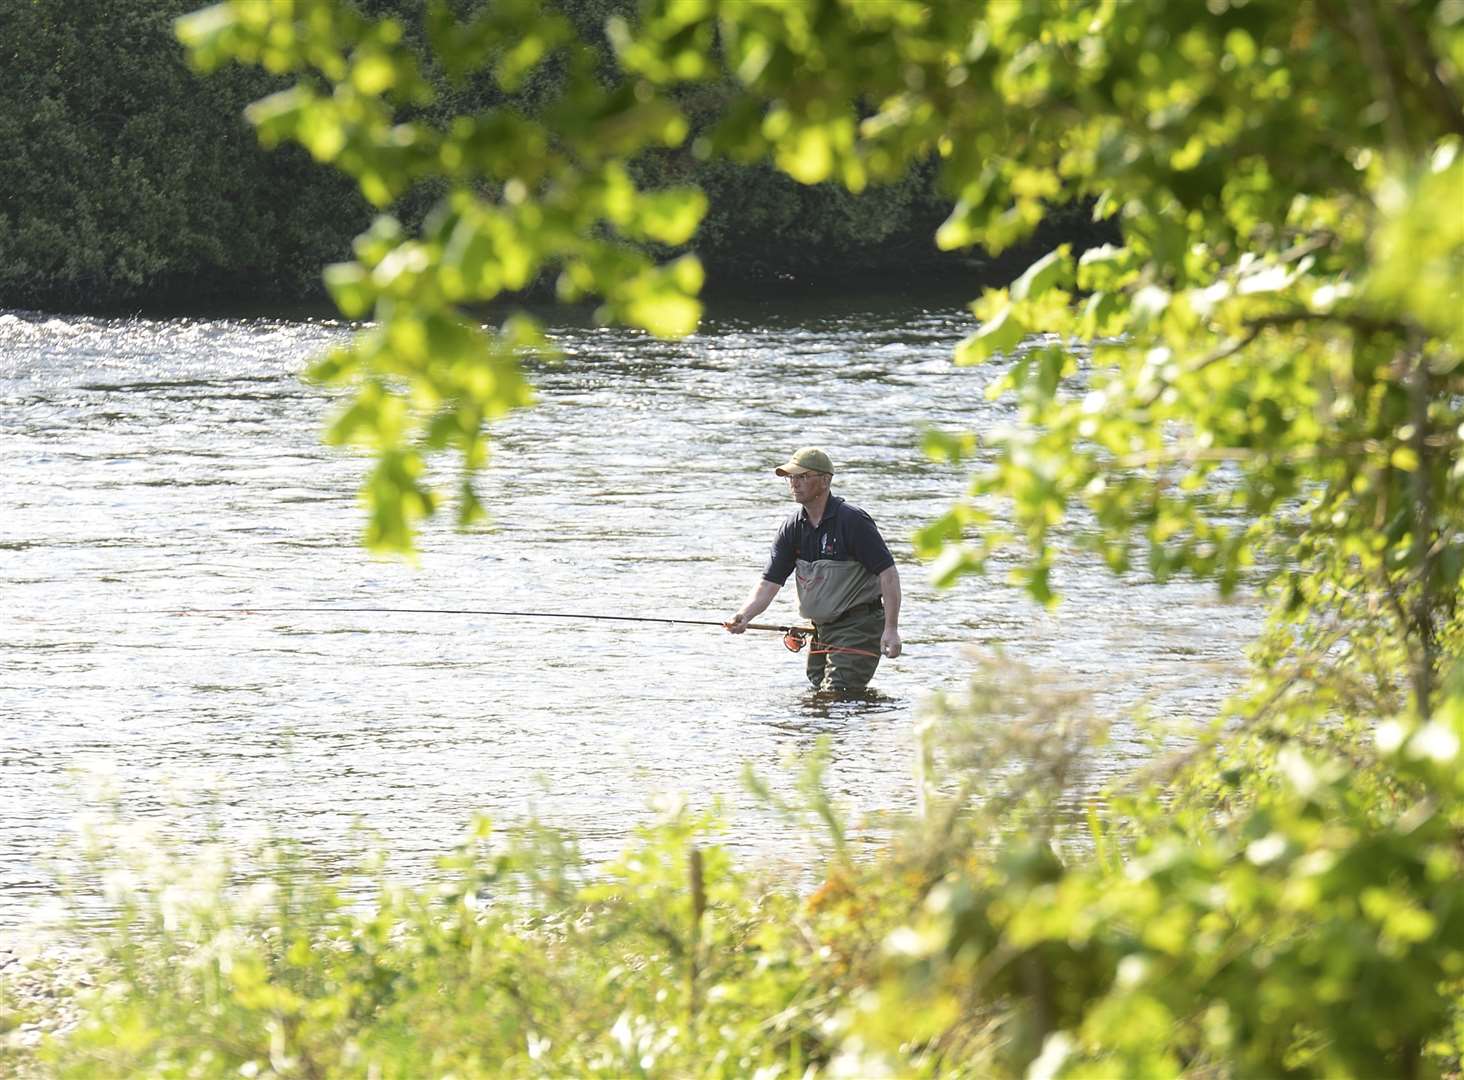 An angler in the River Ness during warmer times. Picture: Gary Anthony.